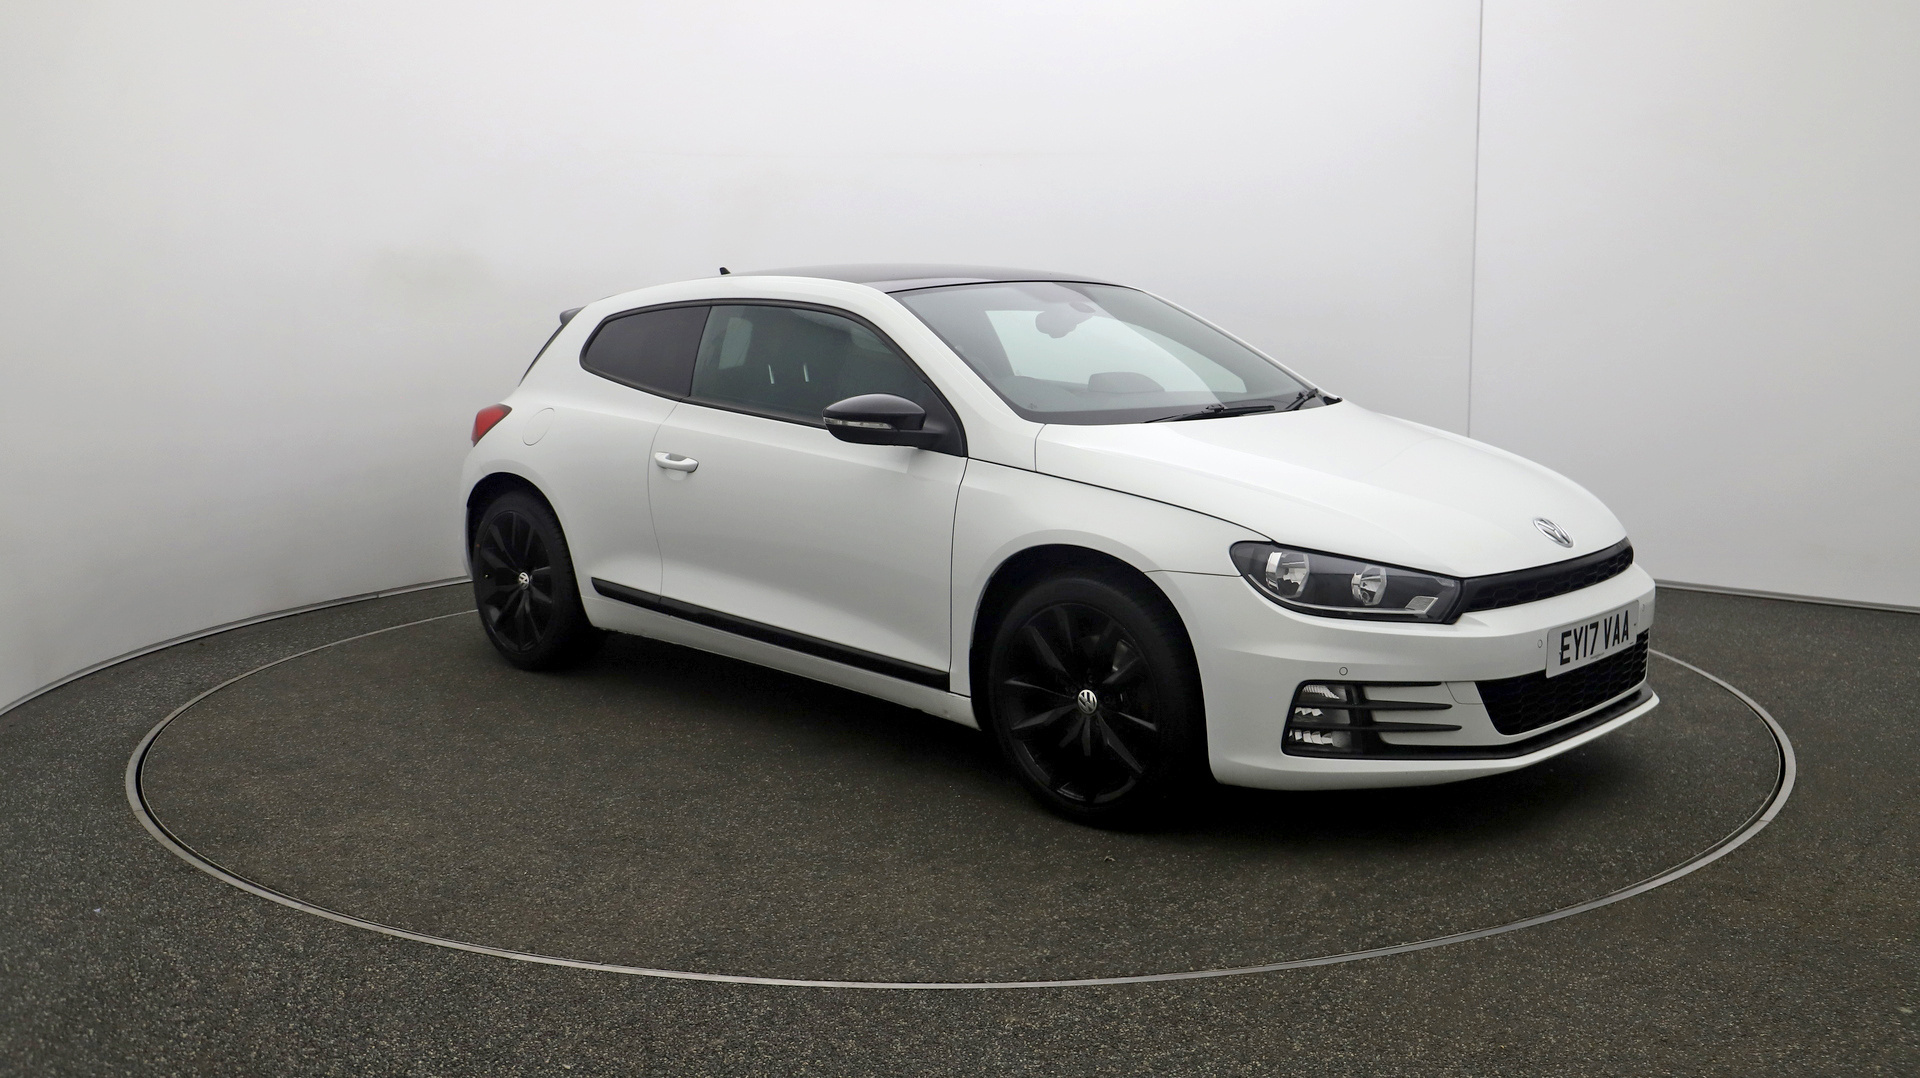 Used Volkswagen Scirocco for sale